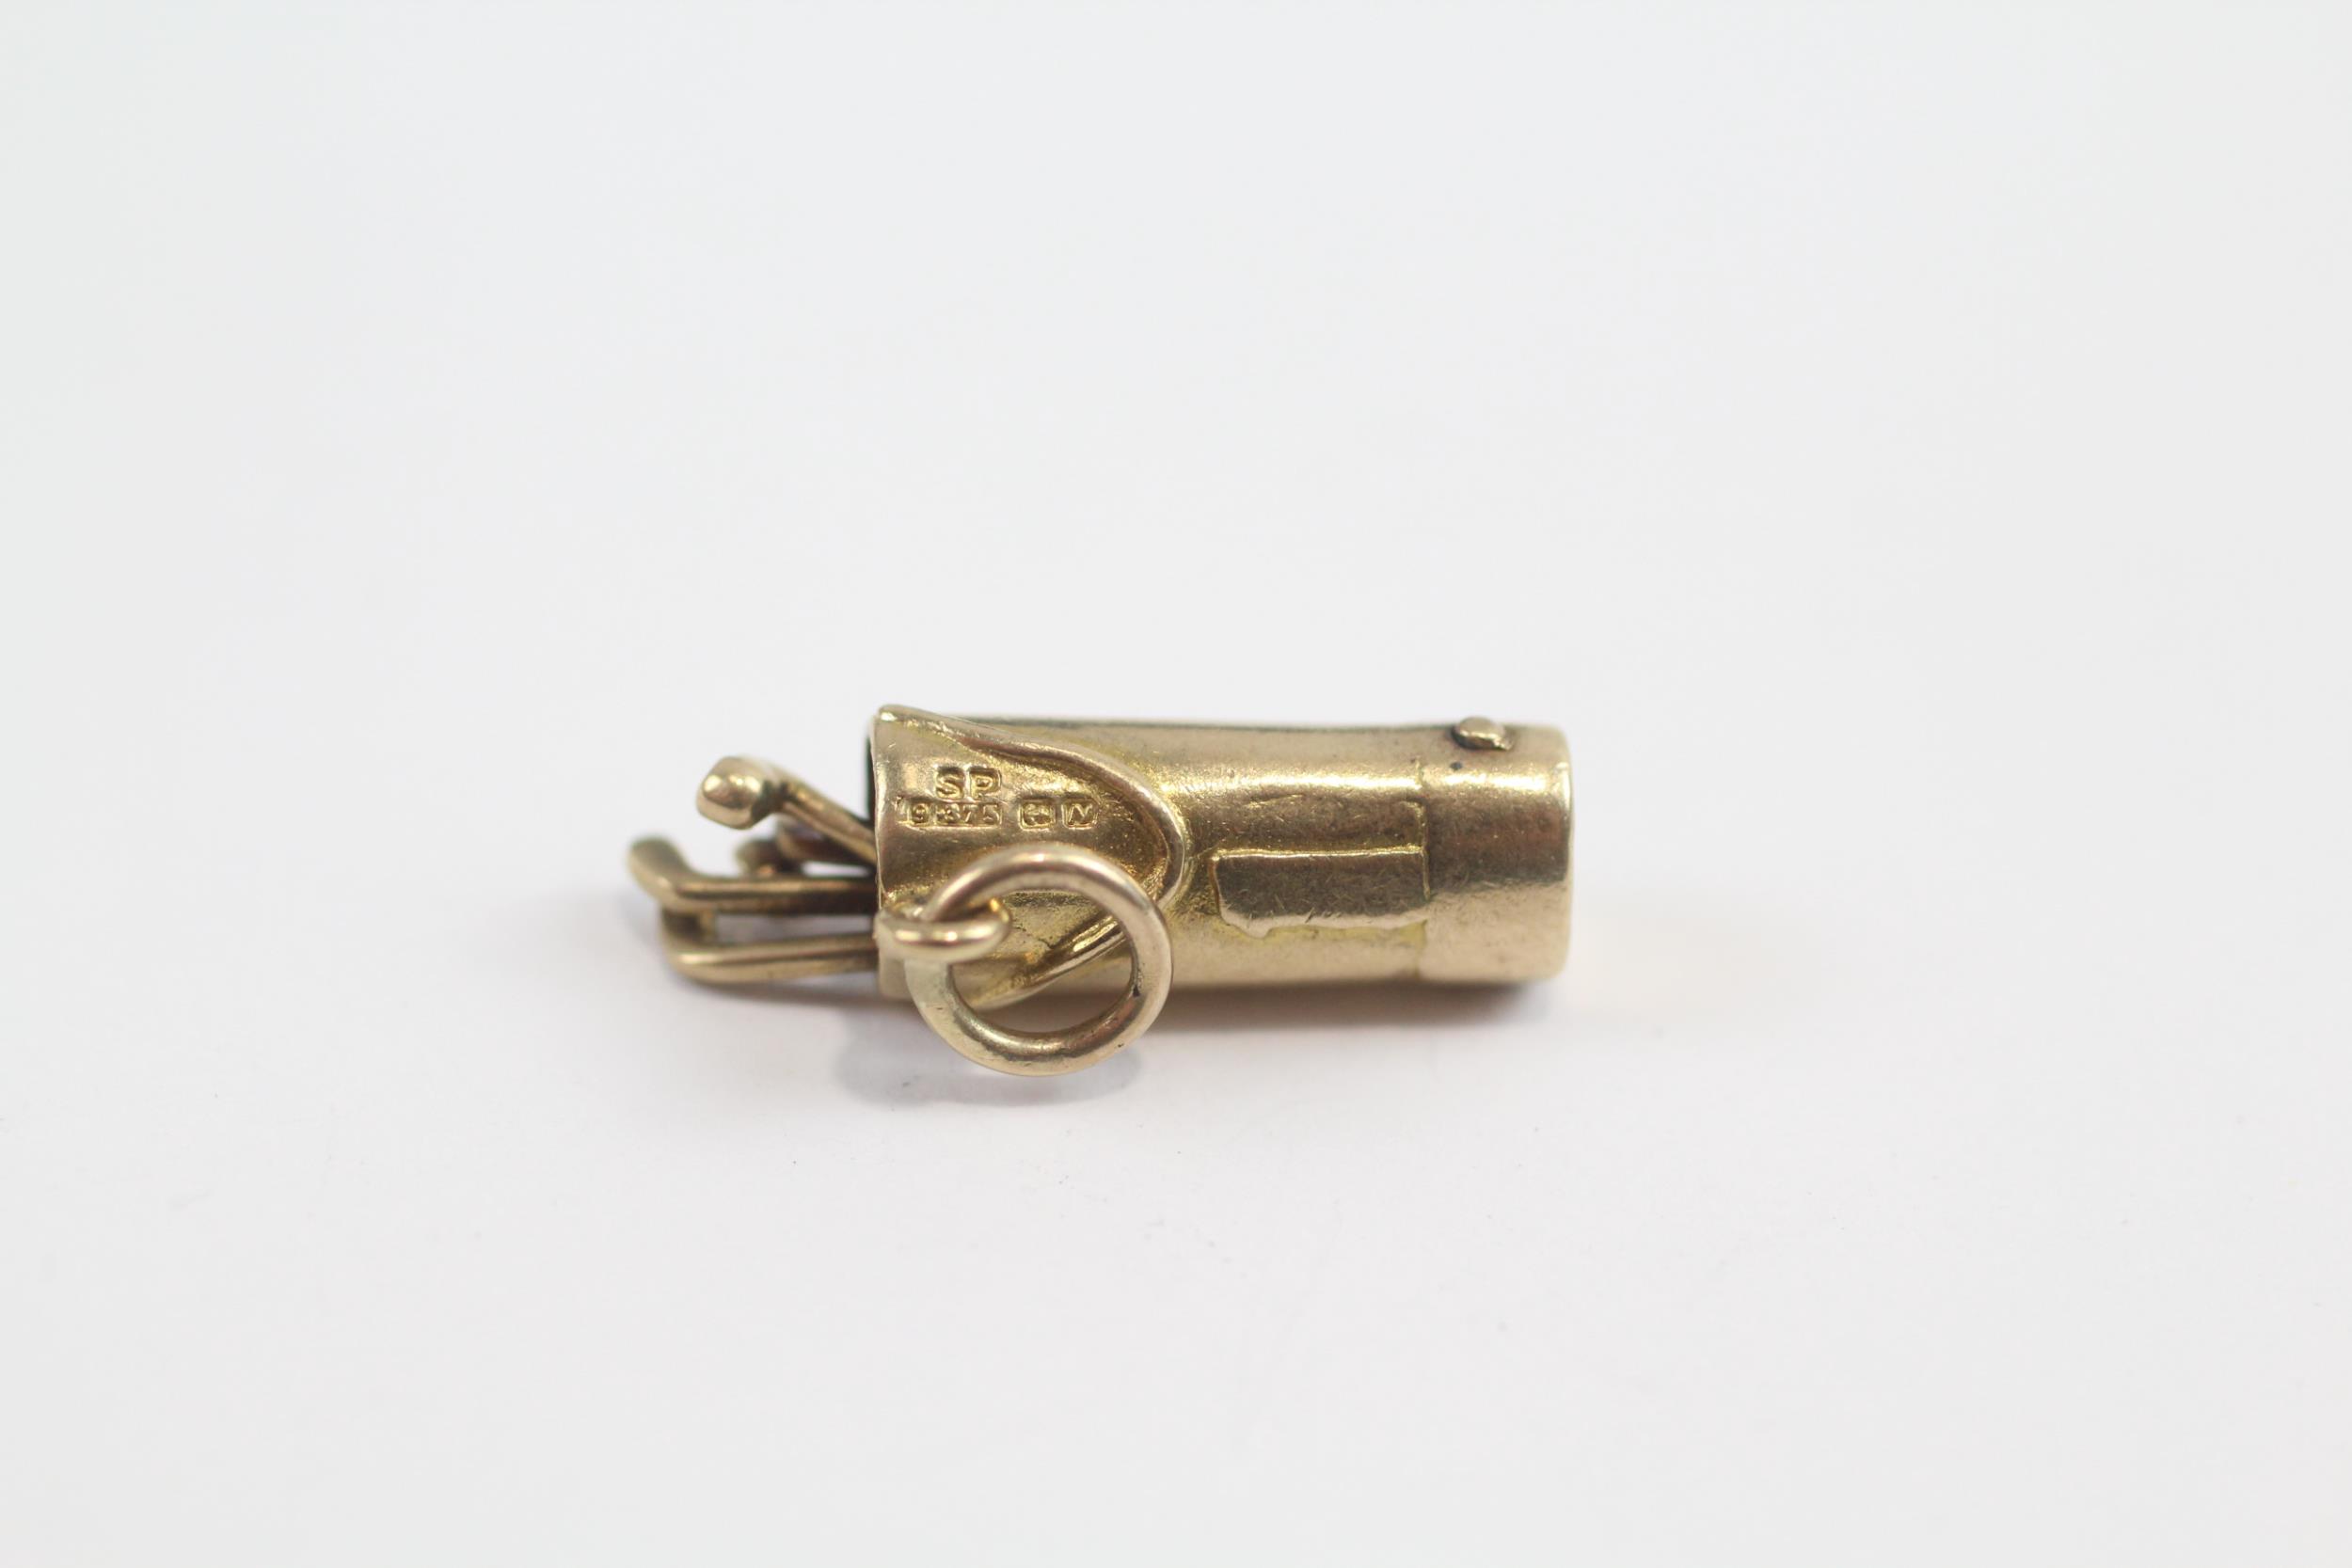 9ct Gold Vintage Gold Clubs In Bag Charm (2.3g) - Image 3 of 4